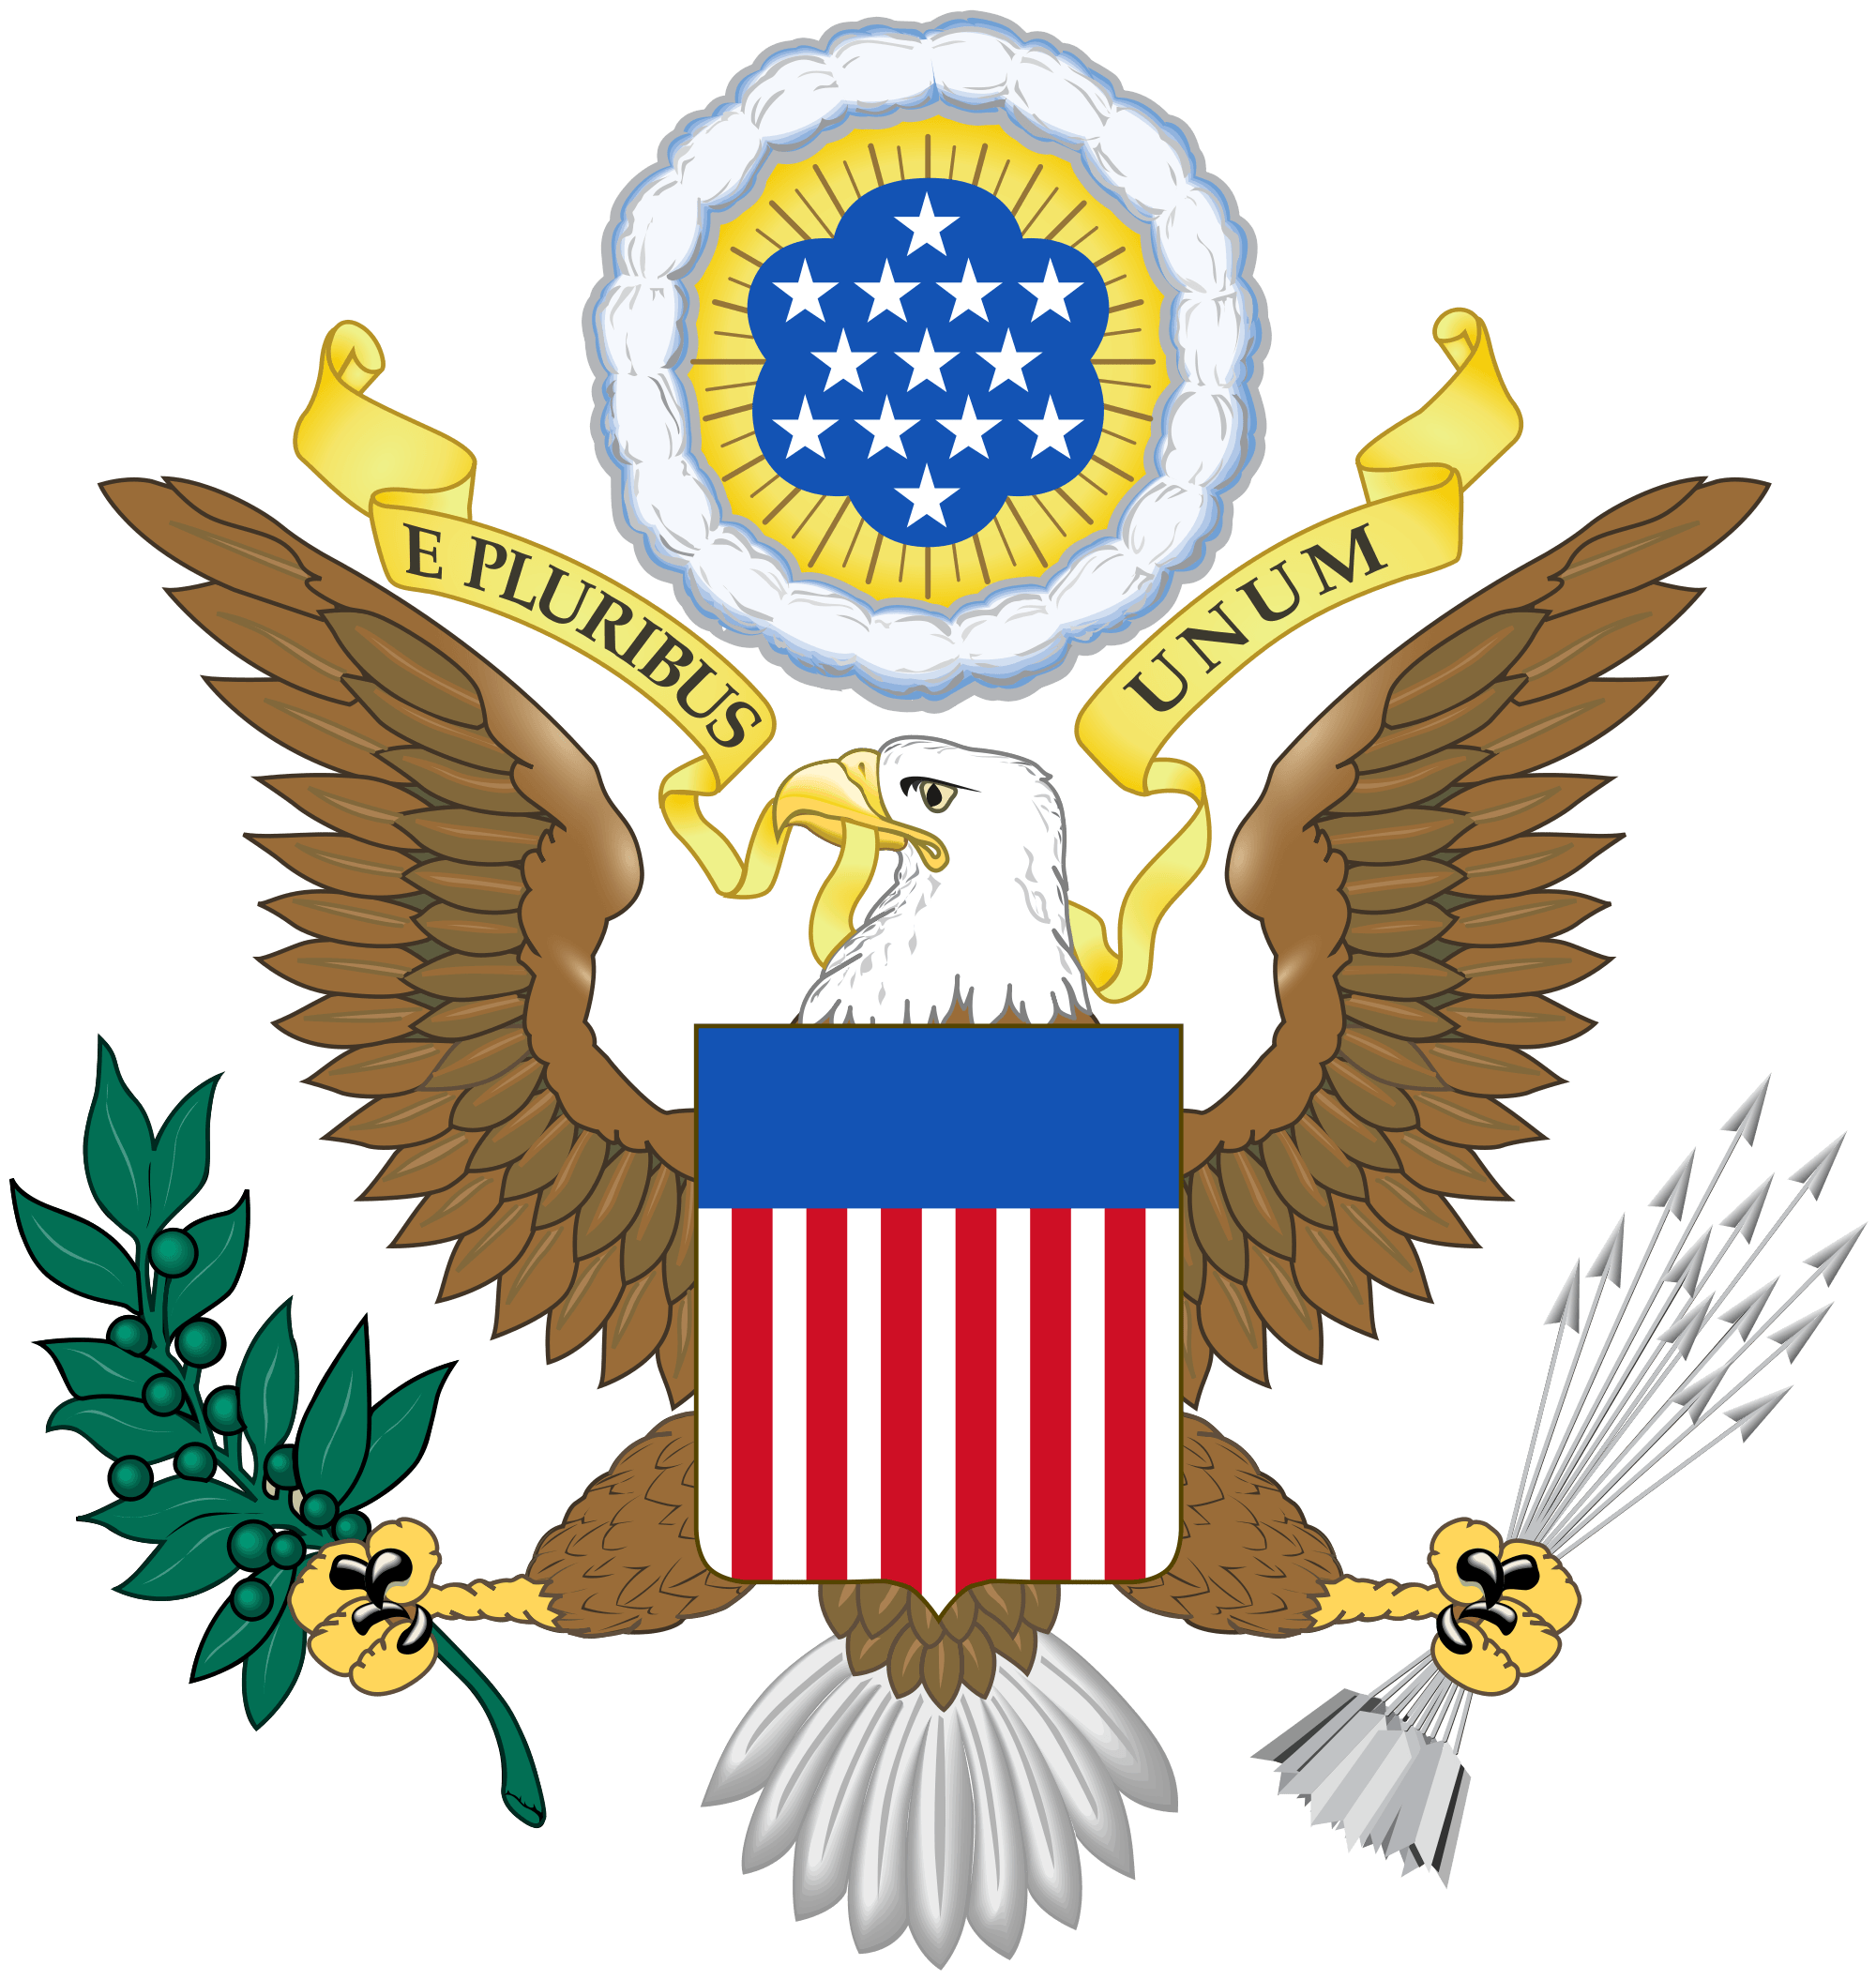 New American Eagle Logo - Great Seal of the United States